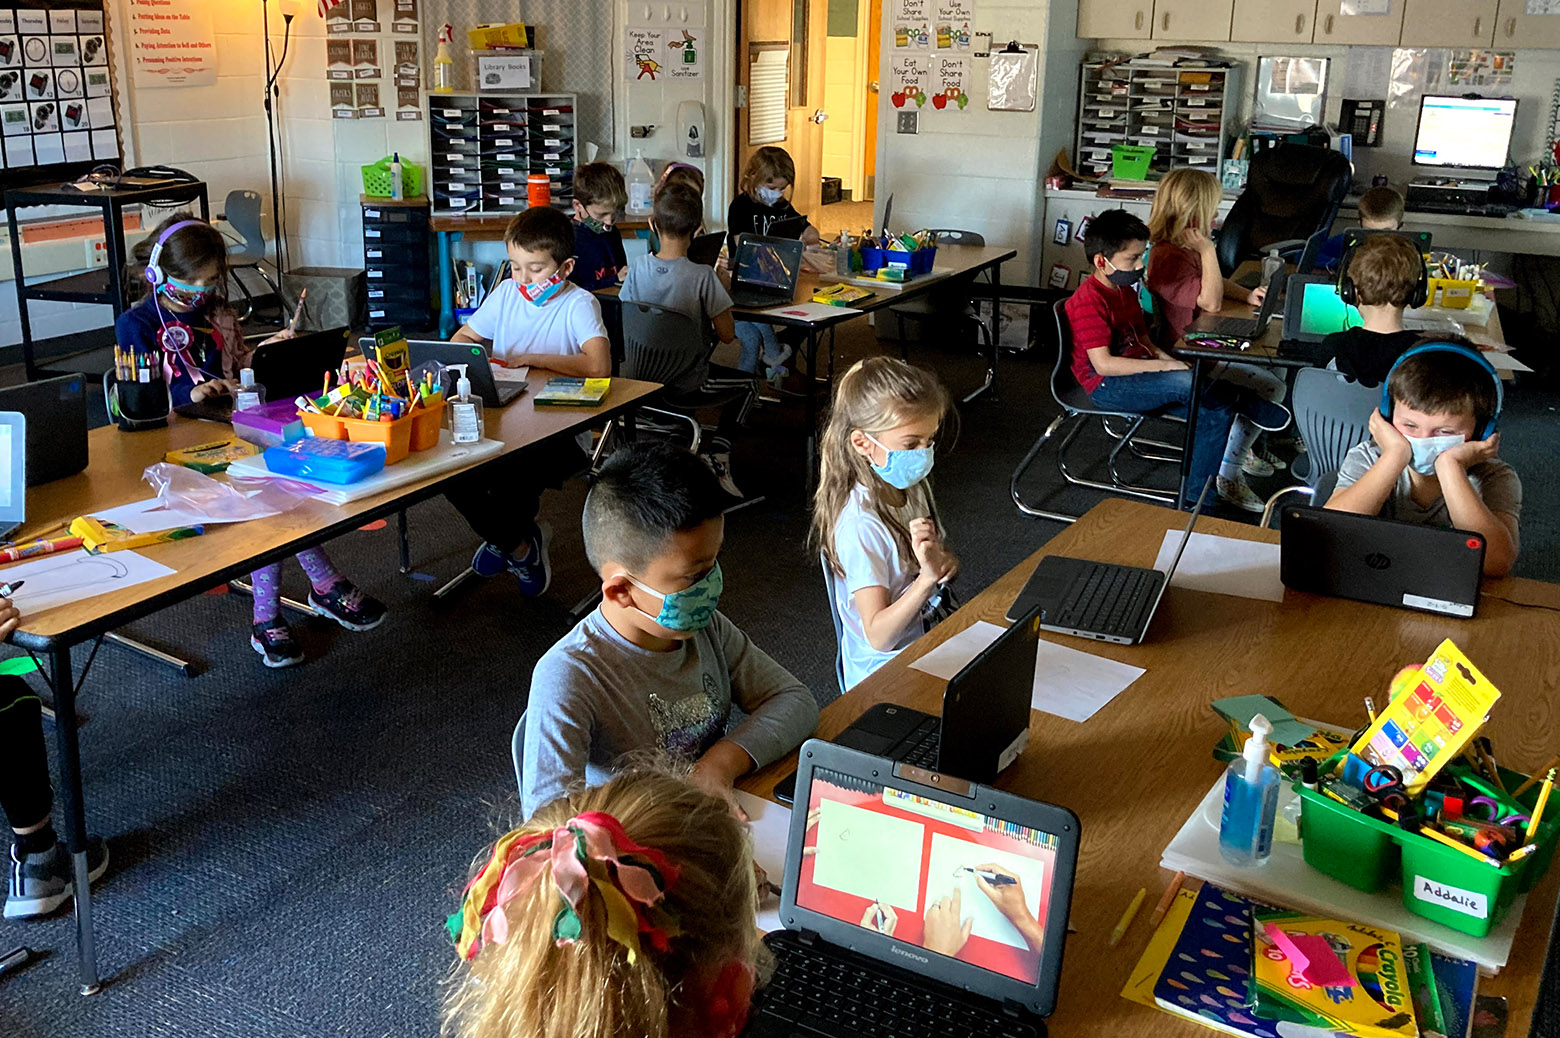 Kids learning in the classroom with laptops